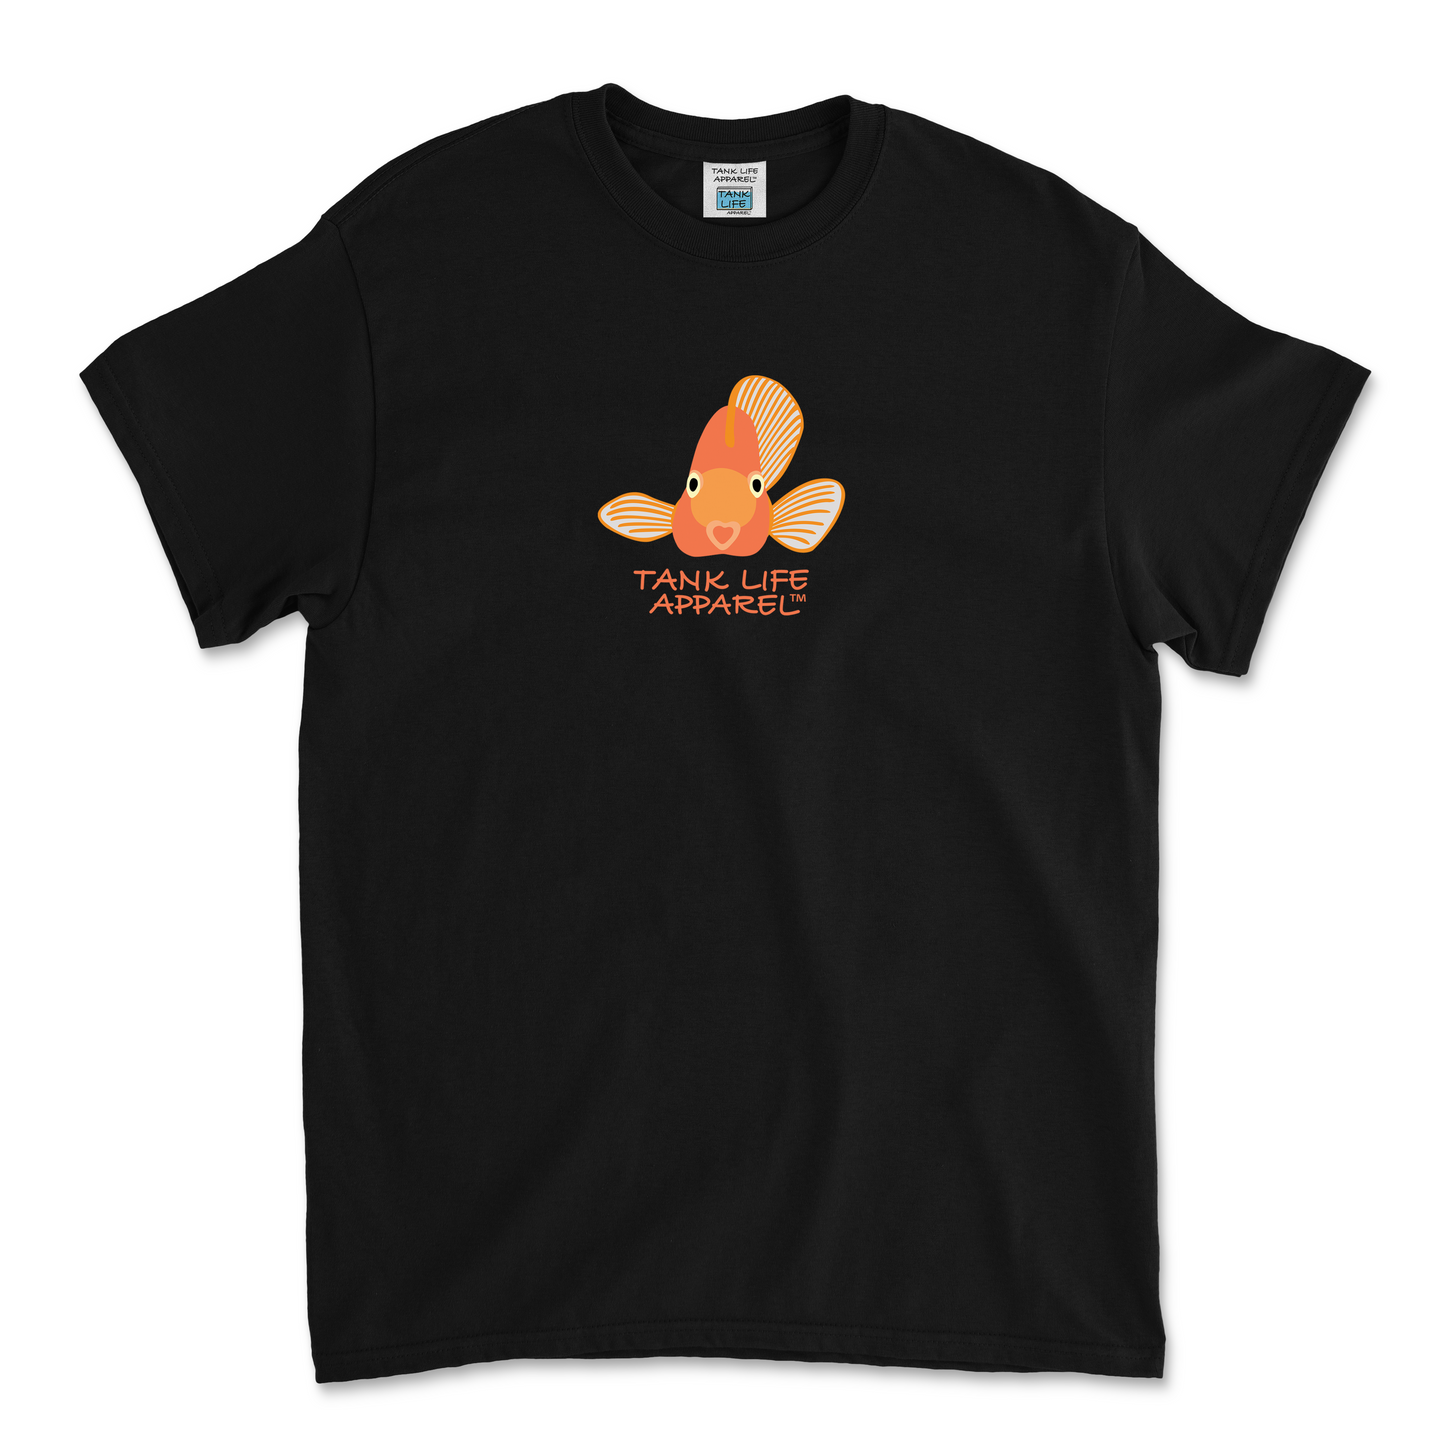 The Tank Life Apparel orange parrot cichlid fish design on a youth tee. Orange adorable fish.